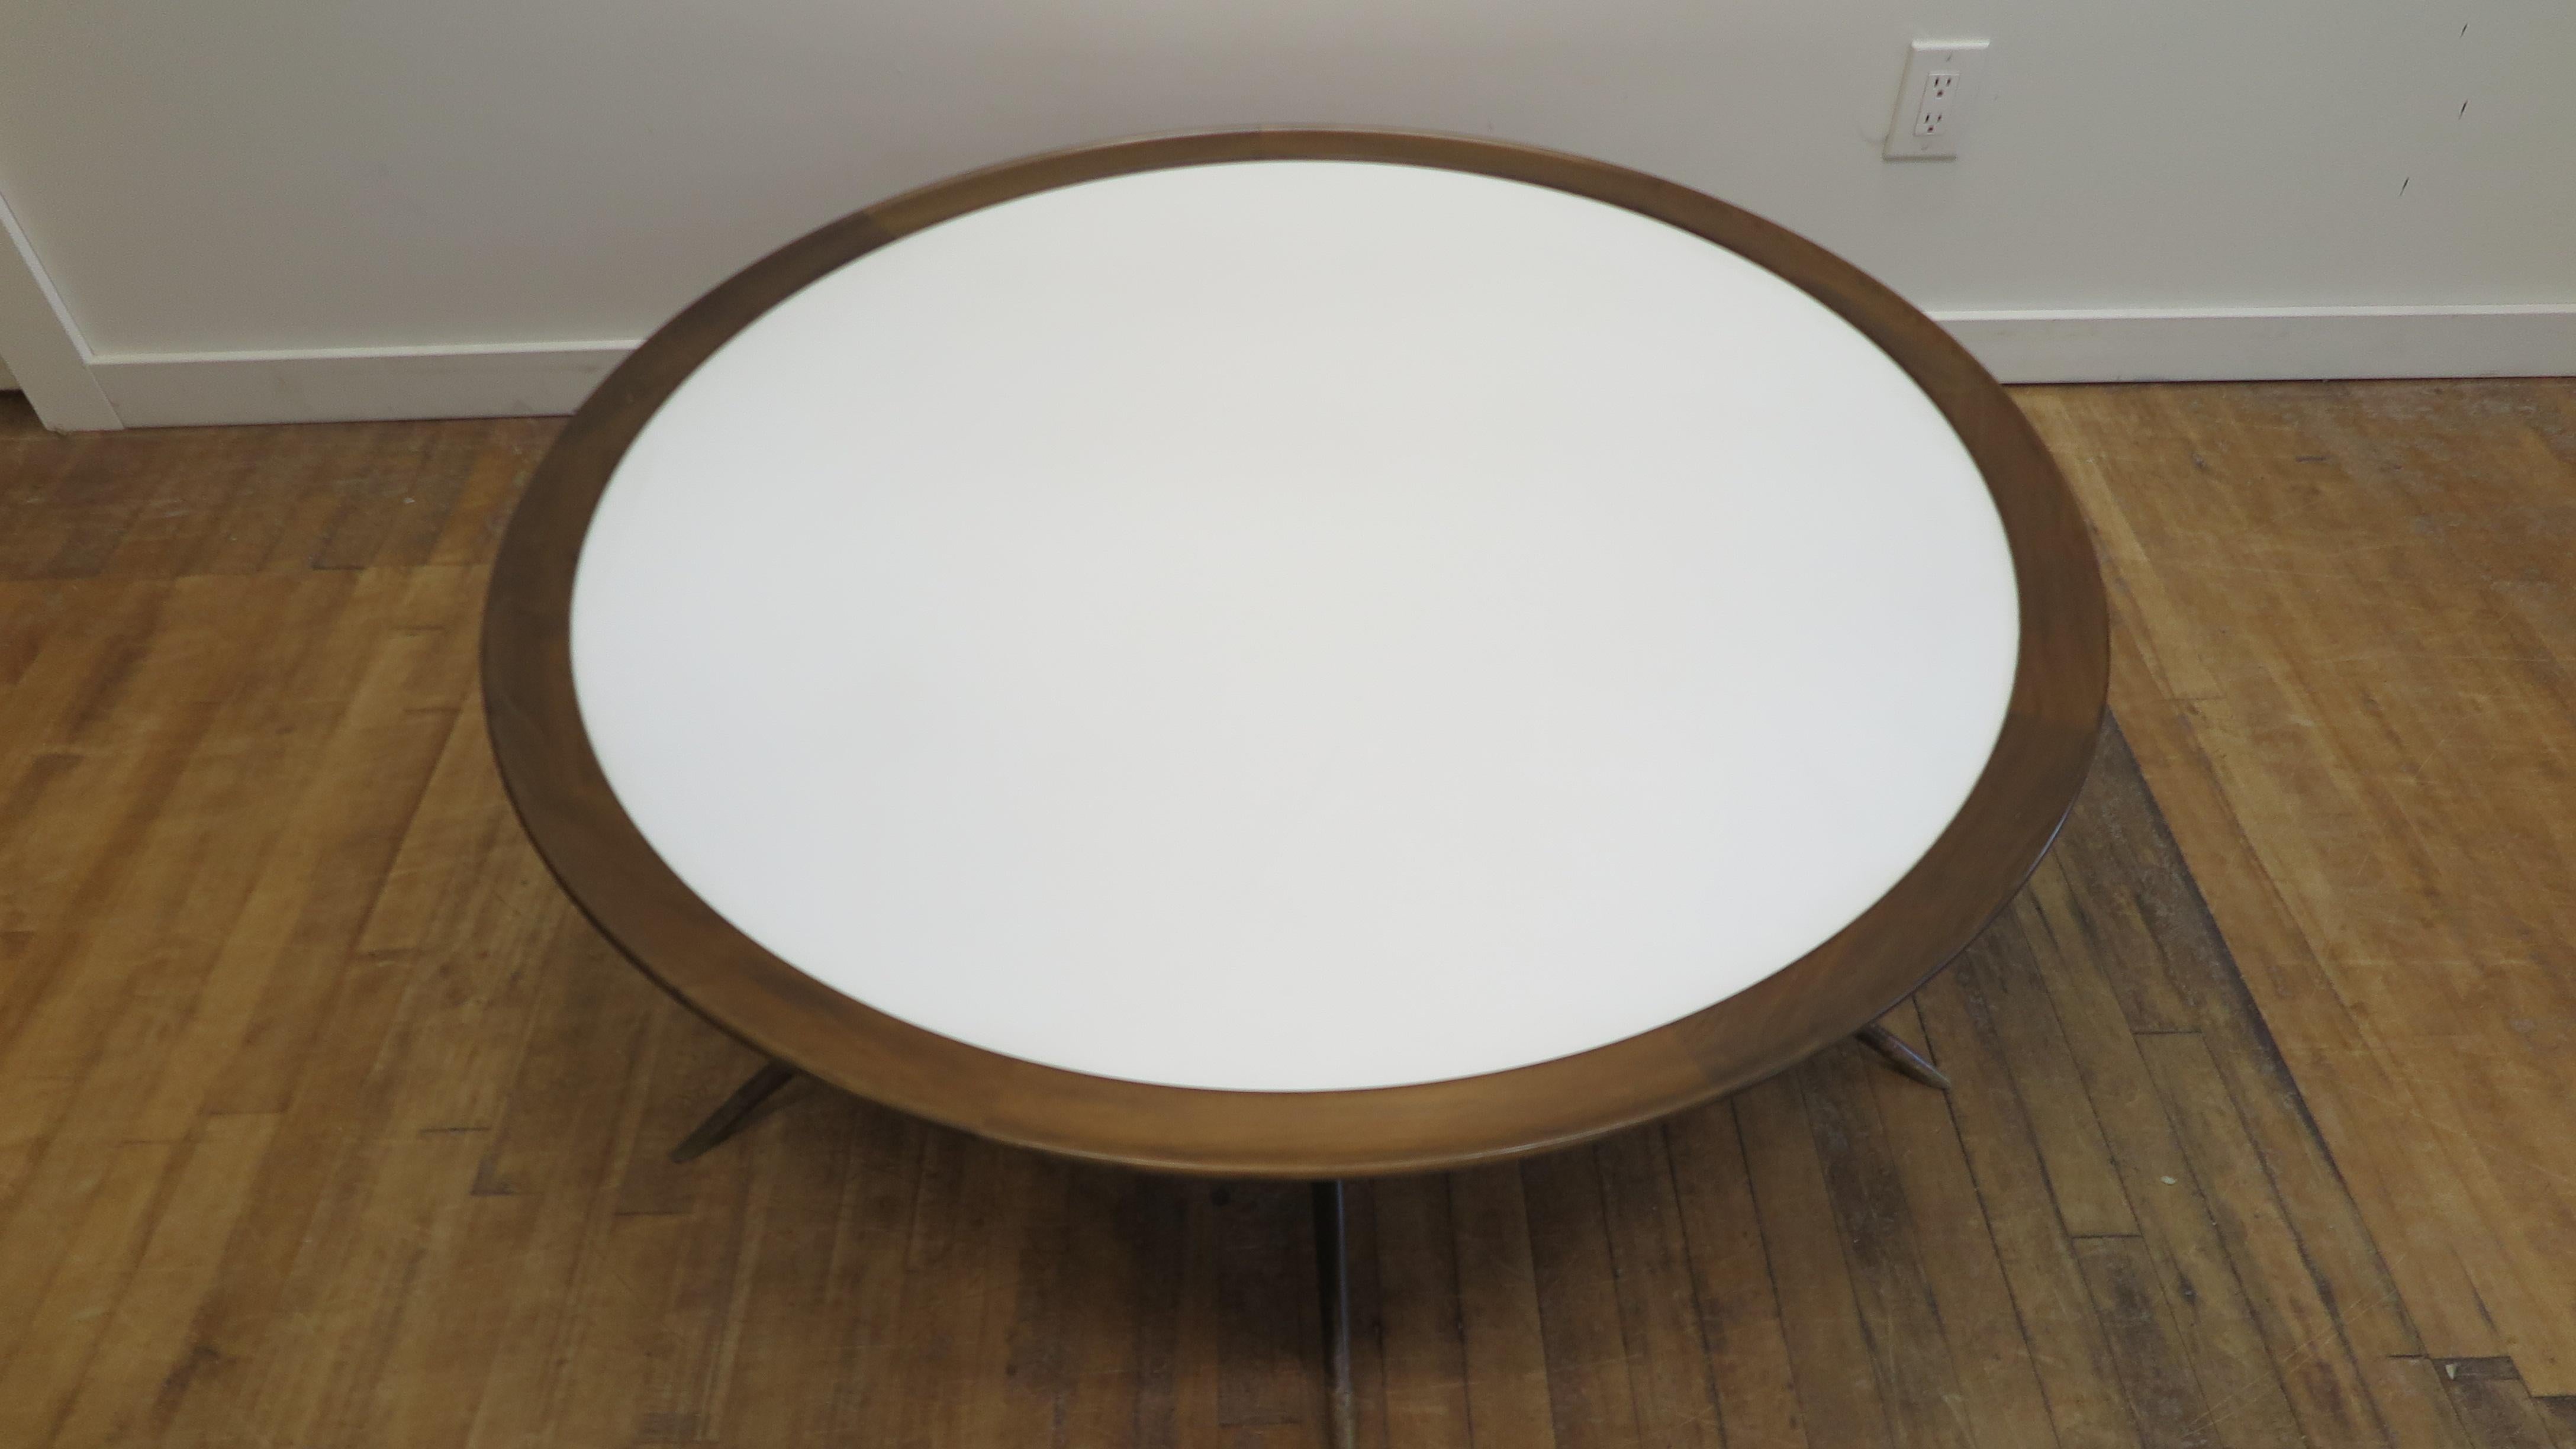 Poul Jensen Danish Modern Coffee Table.  A spectacular Danish Modern coffee table by Poul Jensen for Selig having original Vitrolite white glass top with splayed legs (spider legs) capped with brass sabot feet.  Very special to have an all original